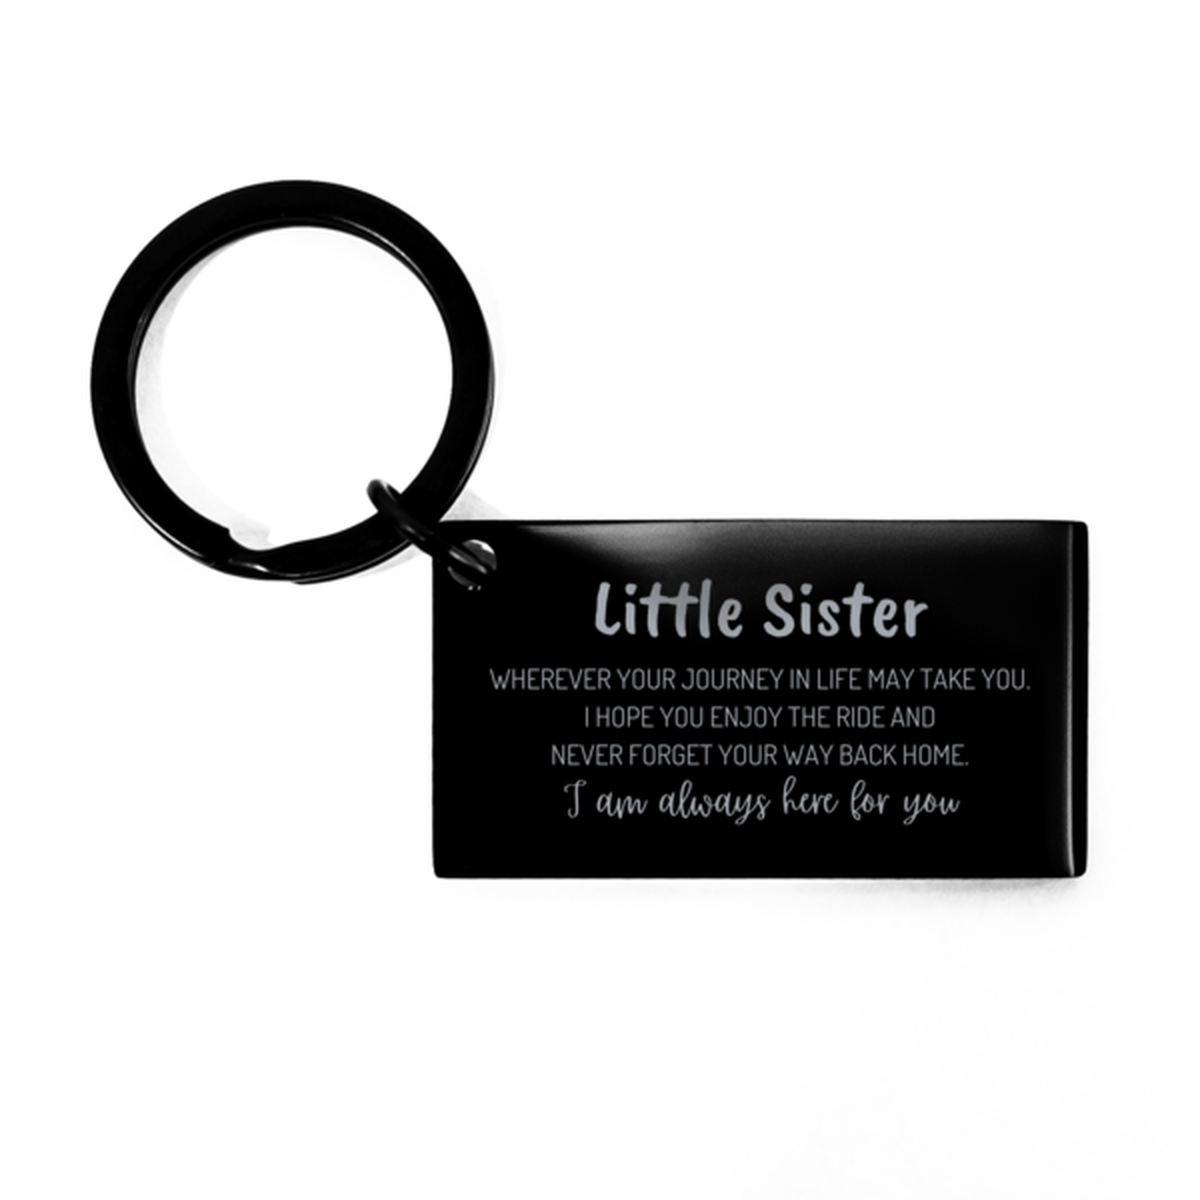 Little Sister wherever your journey in life may take you, I am always here for you Little Sister Keychain, Awesome Christmas Gifts For Little Sister, Little Sister Birthday Gifts for Men Women Family Loved One